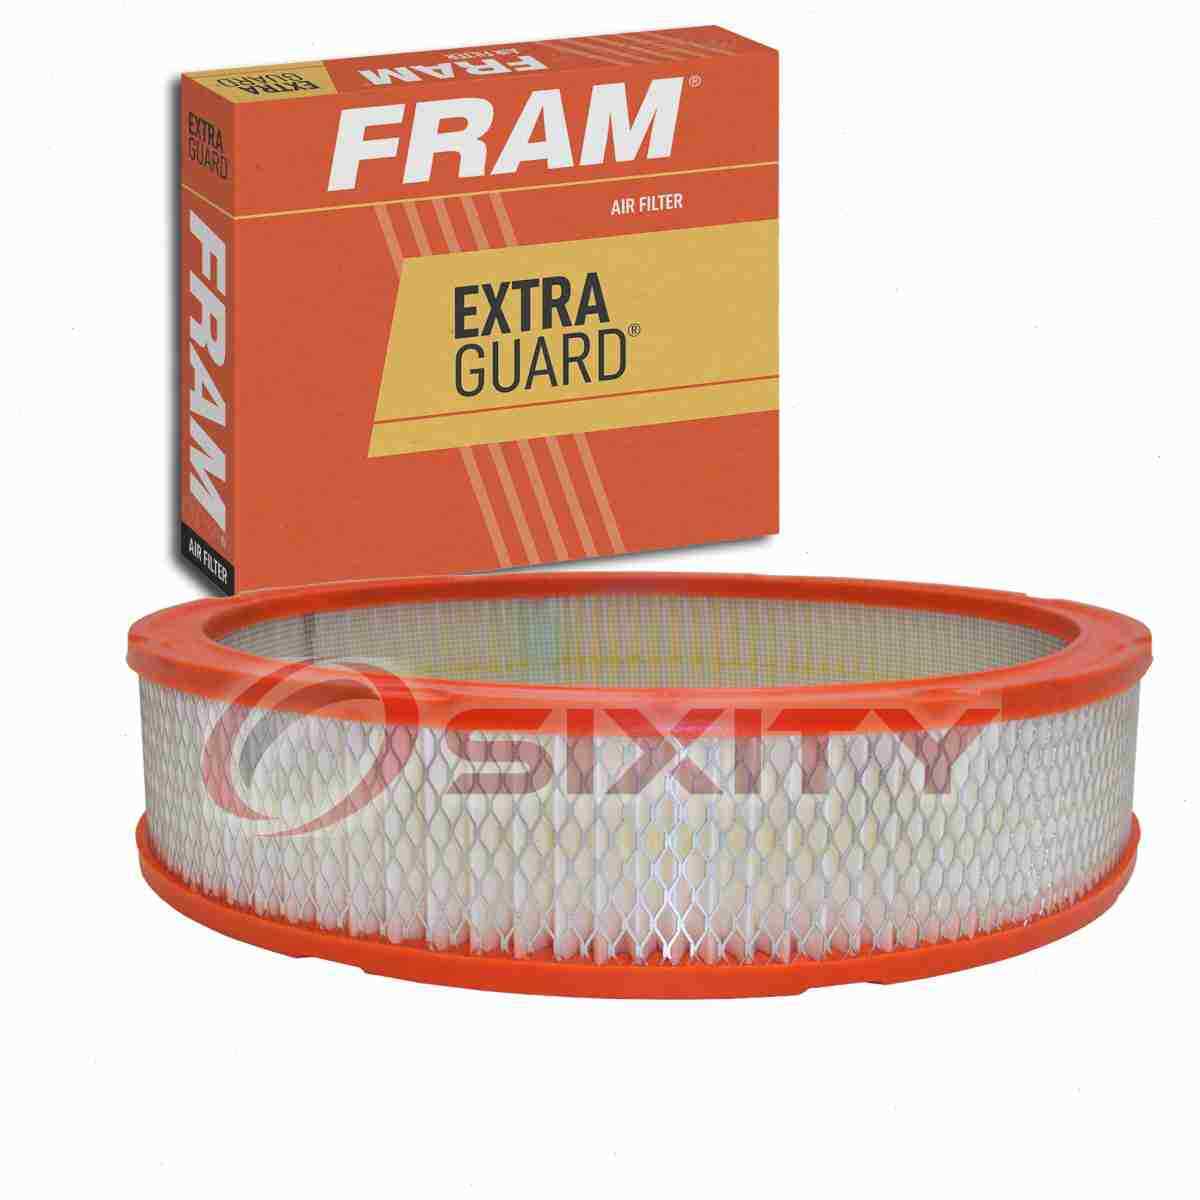 FRAM Extra Guard Air Filter for 1978-1985 Plymouth Caravelle Intake Inlet fj